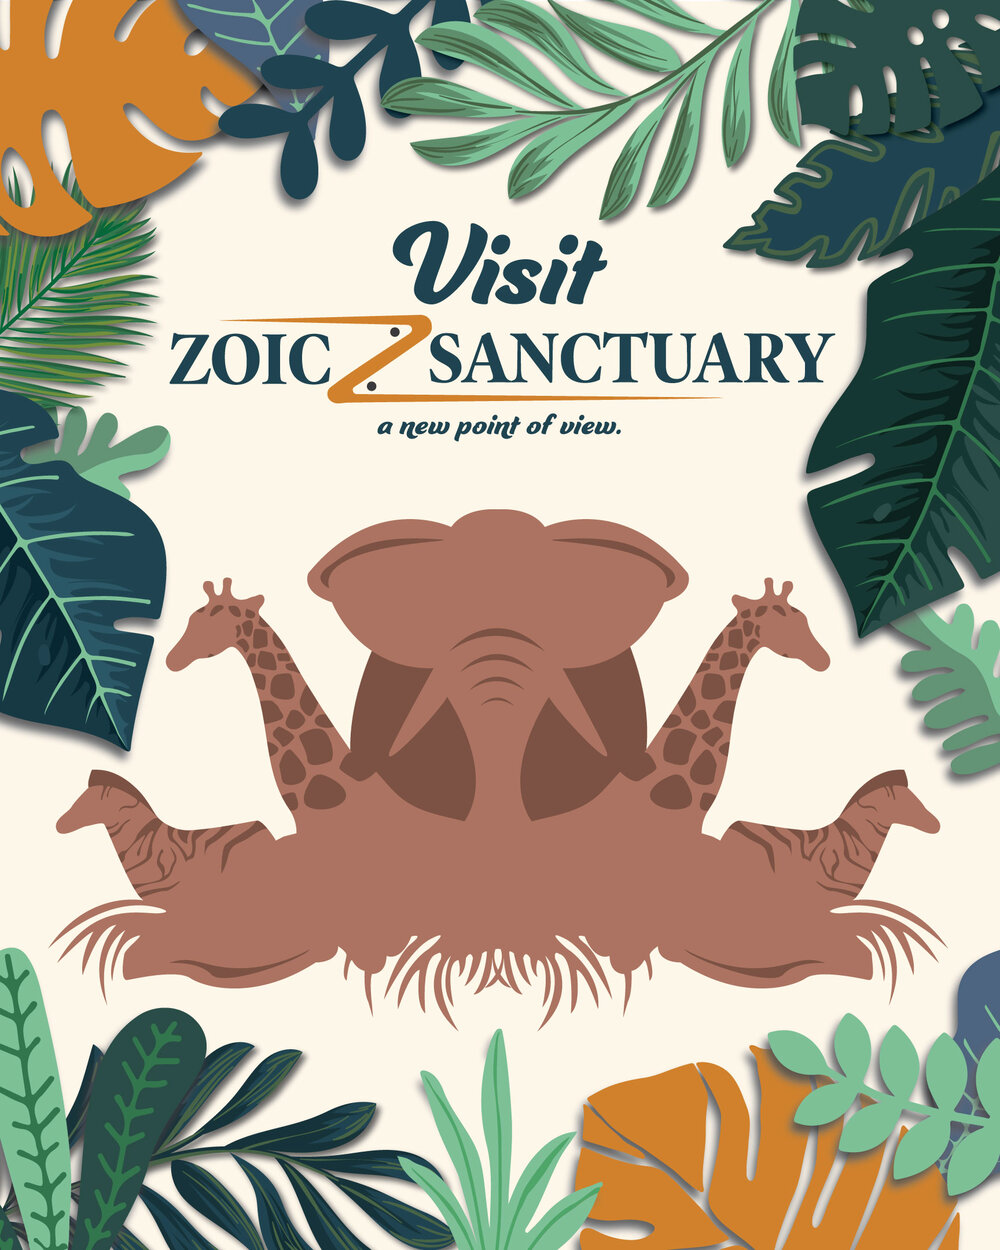 Visit Zoic Sanctuary / 24” x 36” / Introductory Advertisement poster design to the Zoic Sancuary.